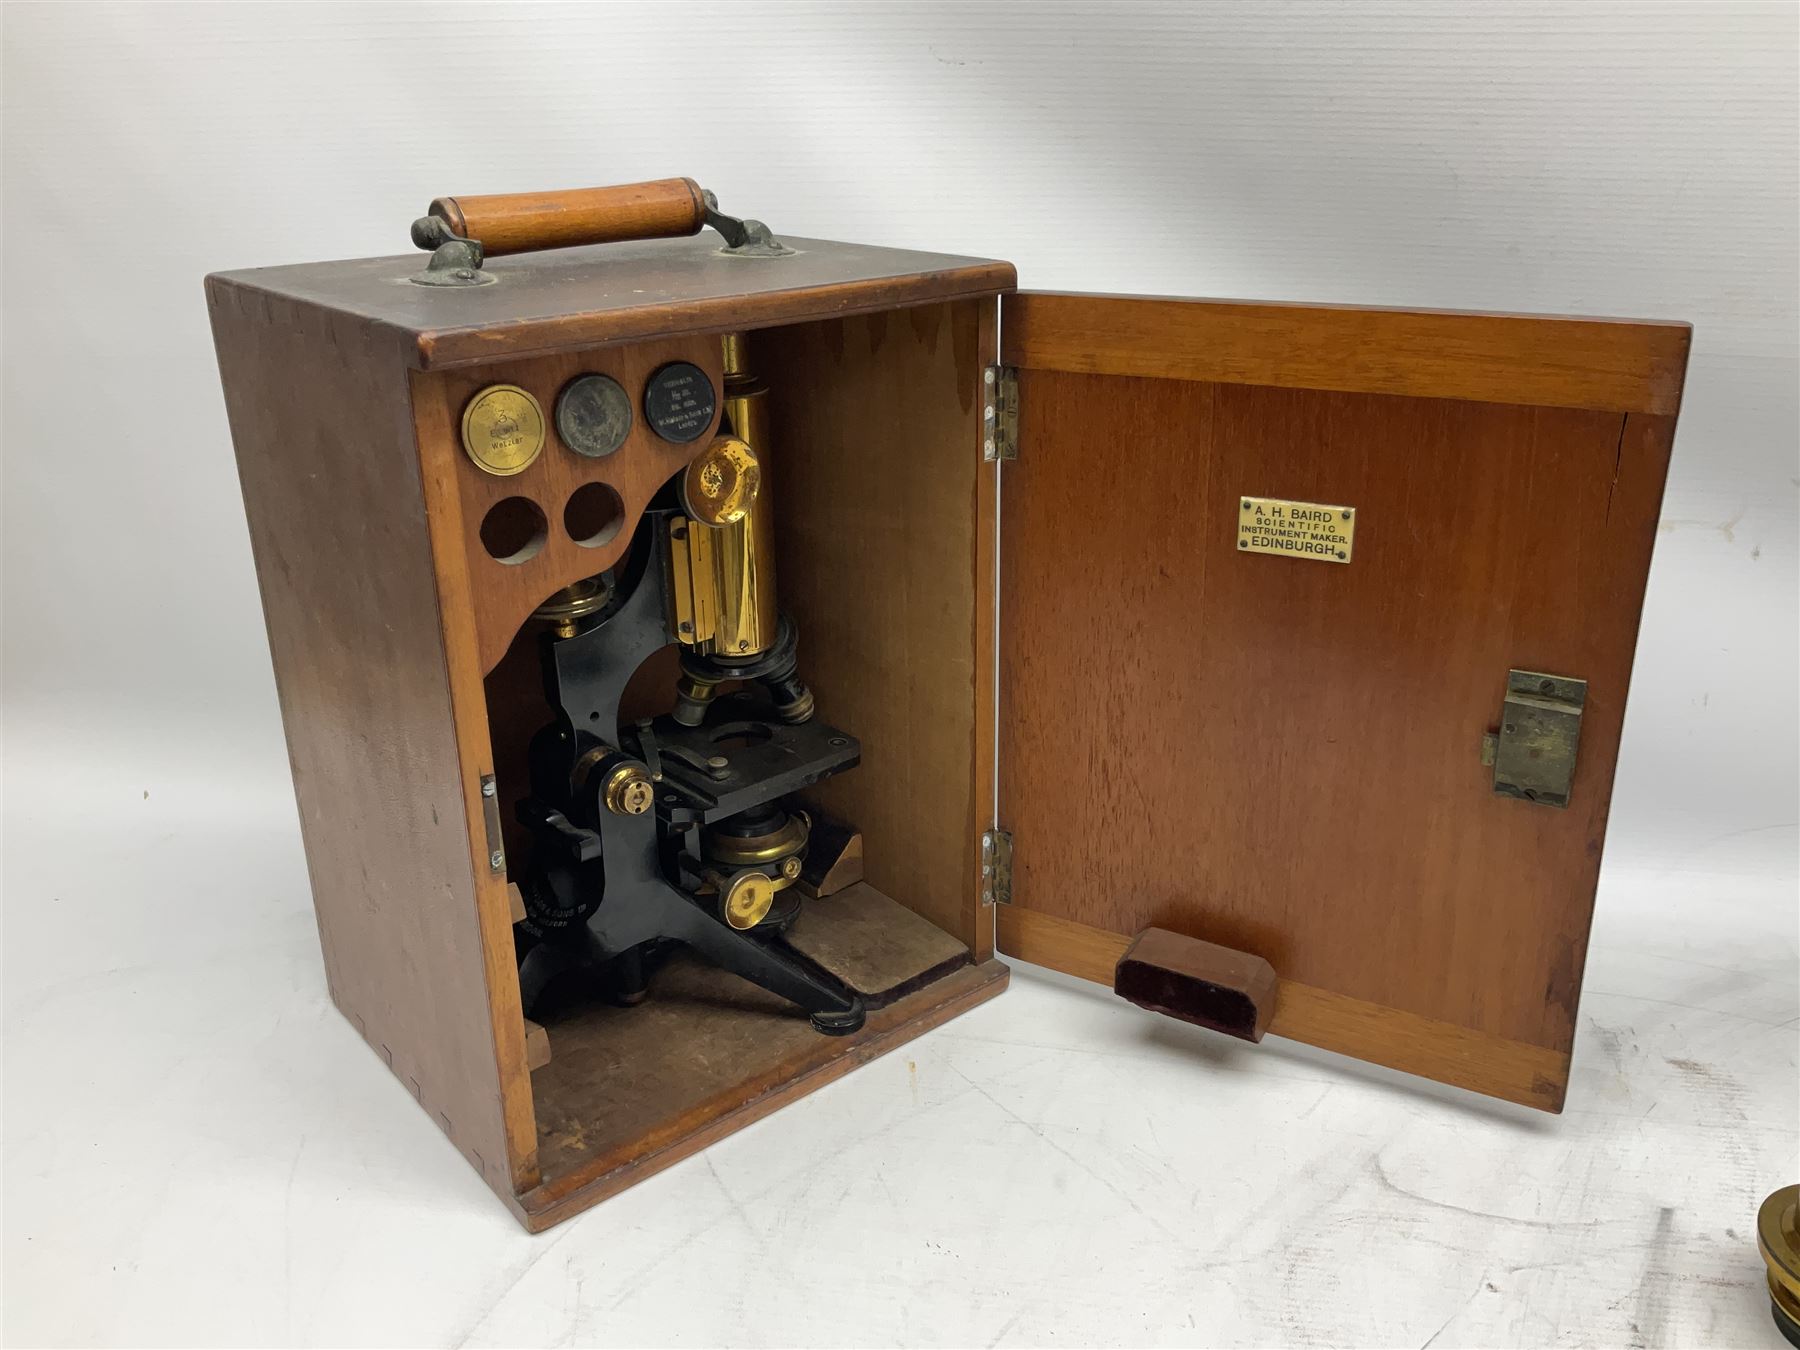 19th century brass and black japanned monocular microscope by W. Watson & Sons Ltd. 313 High Holborn - Image 6 of 15